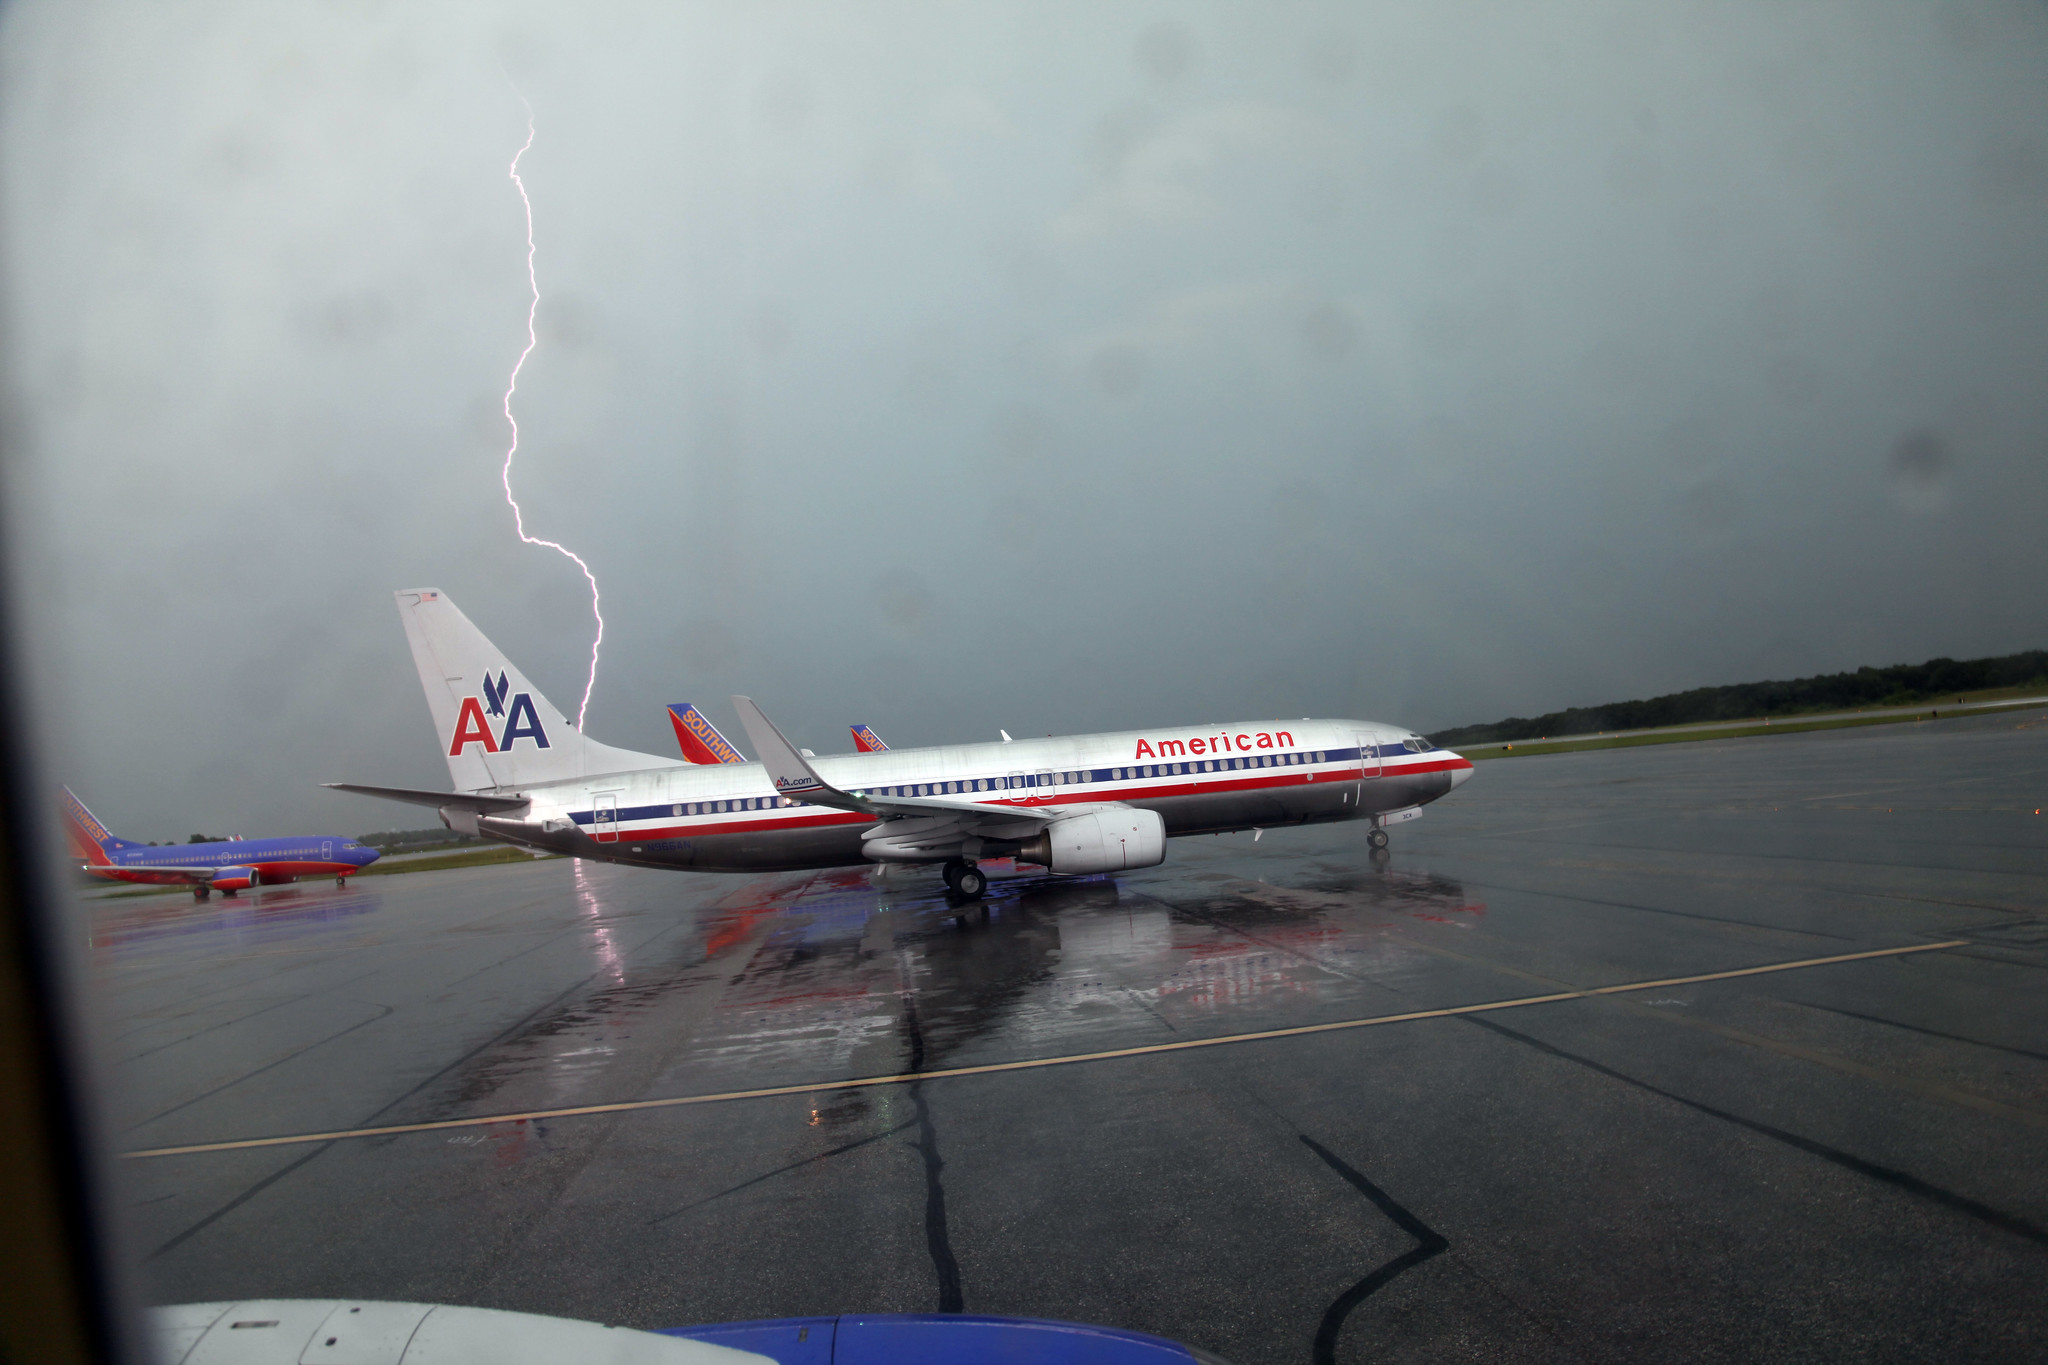 An airplane on a wet runway with lightning in the background.